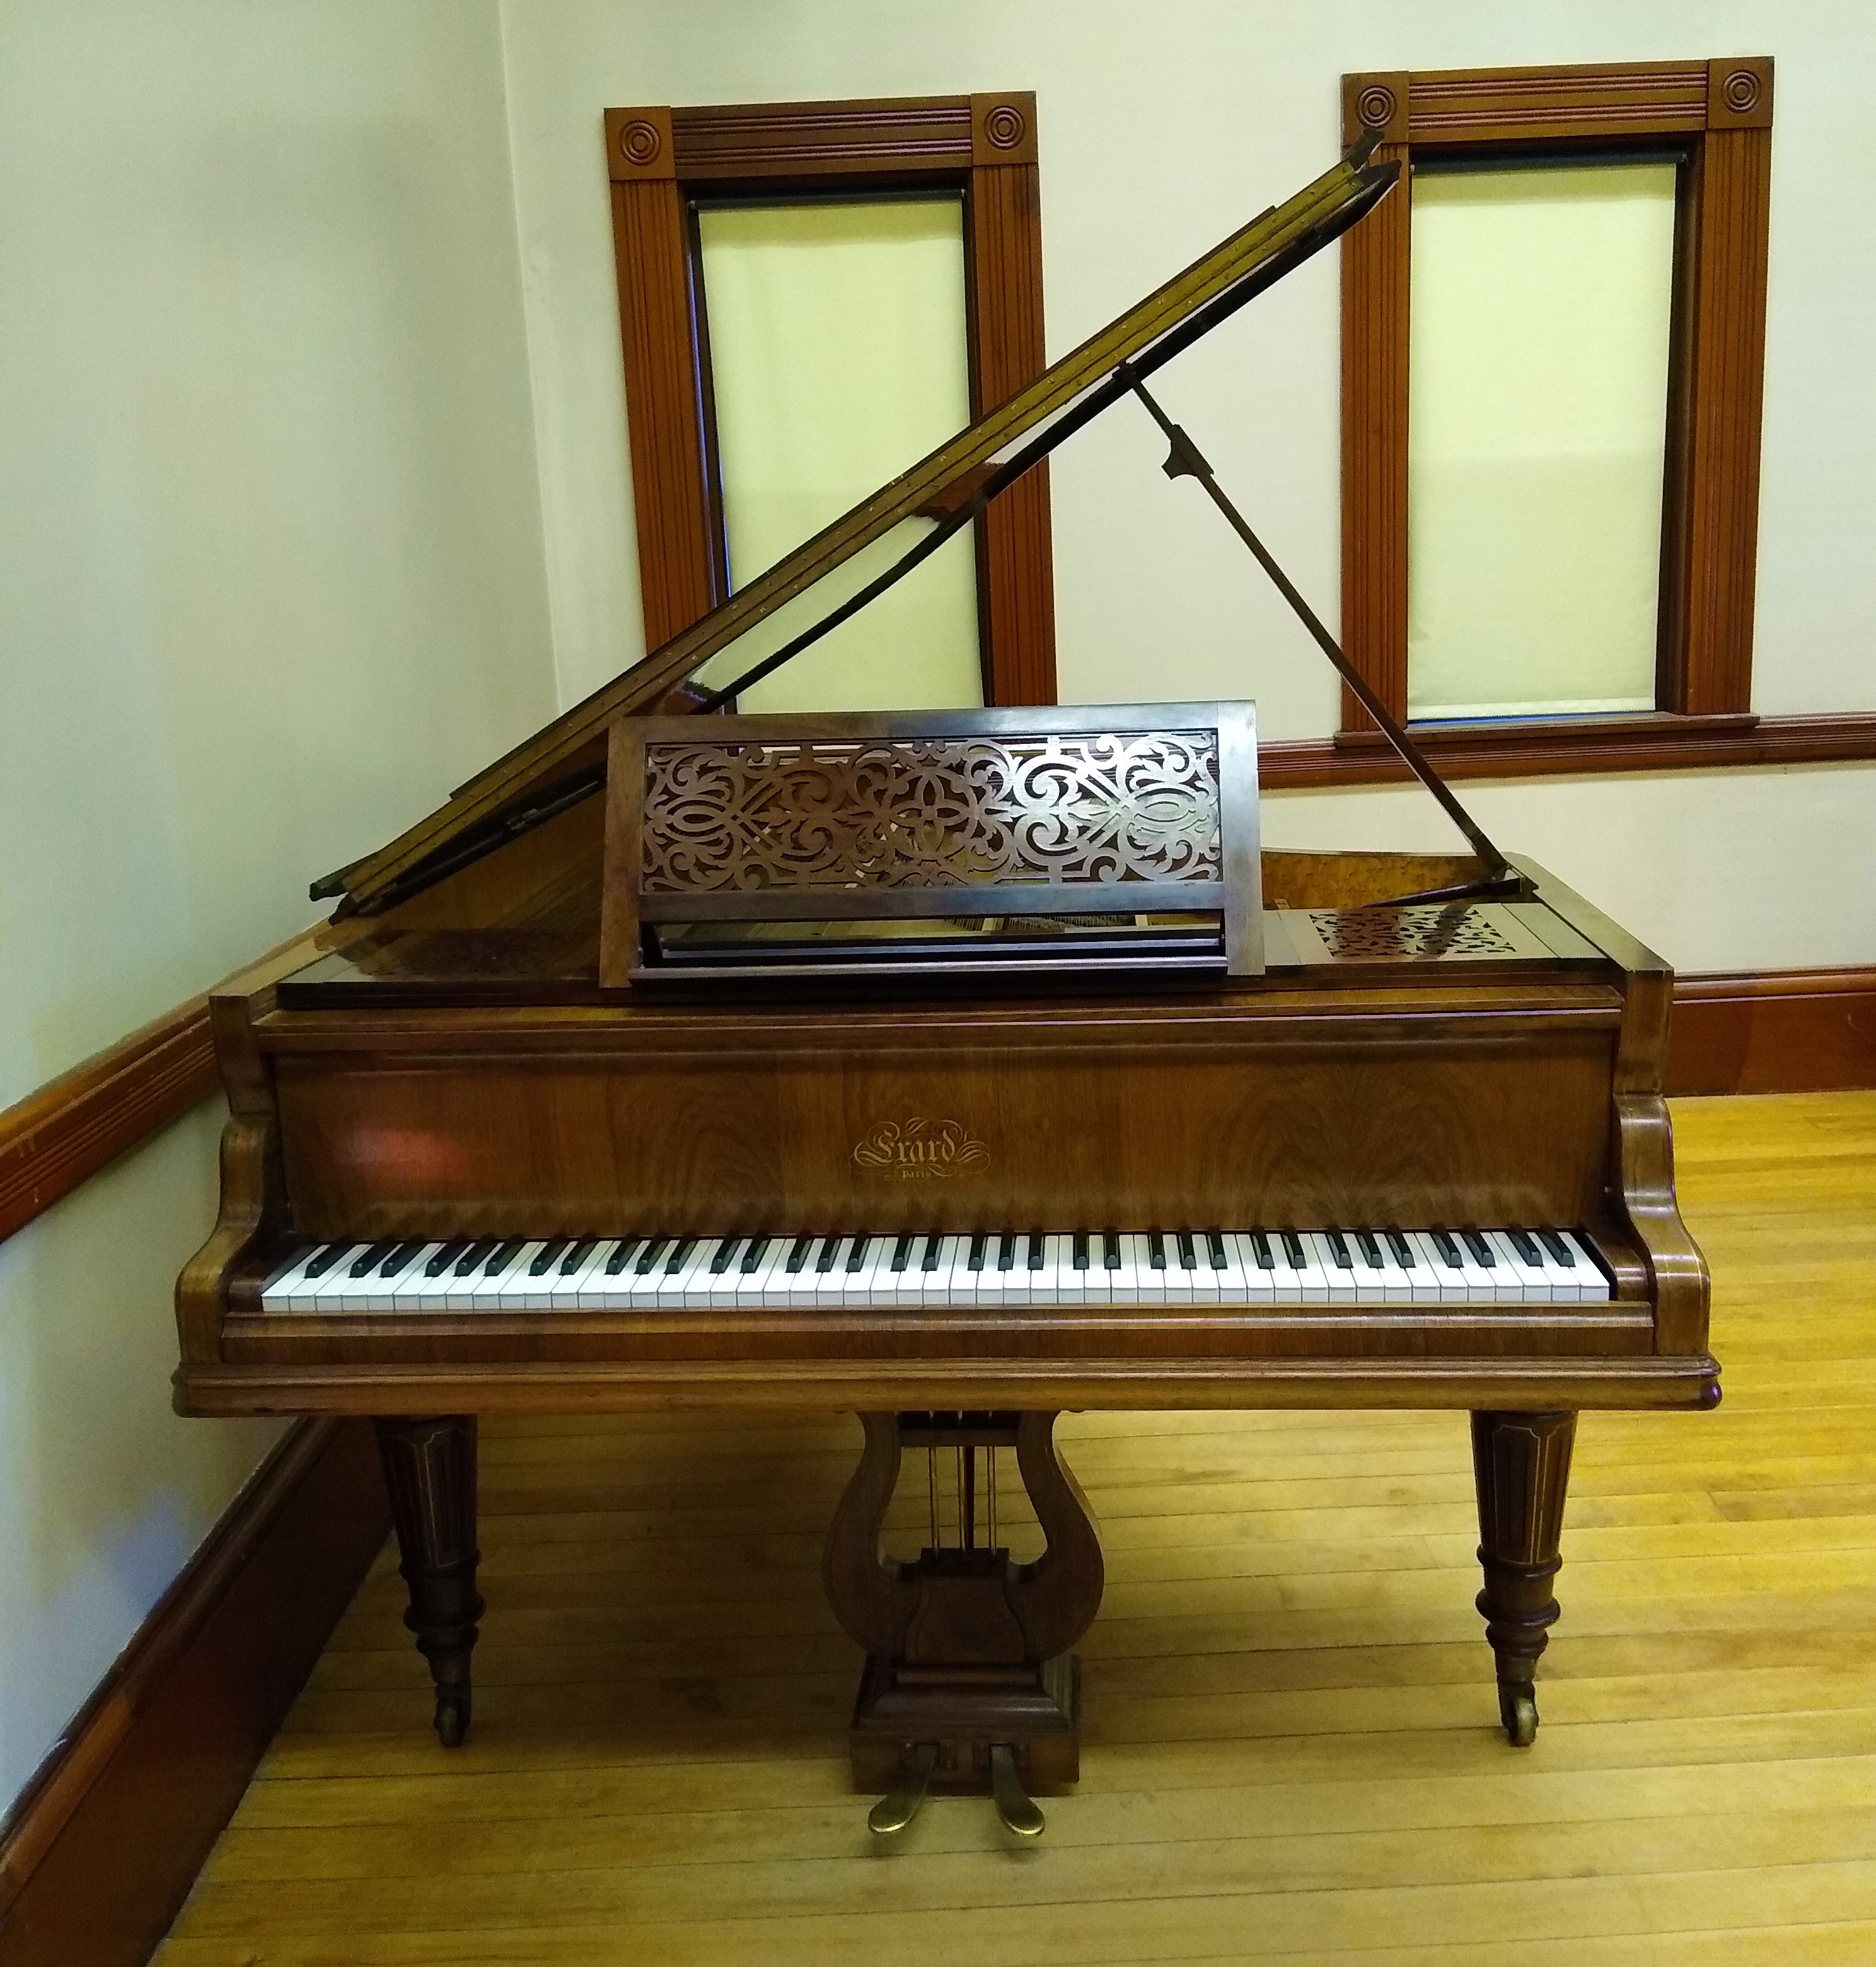 1893 Erard piano from the Frederick Collection